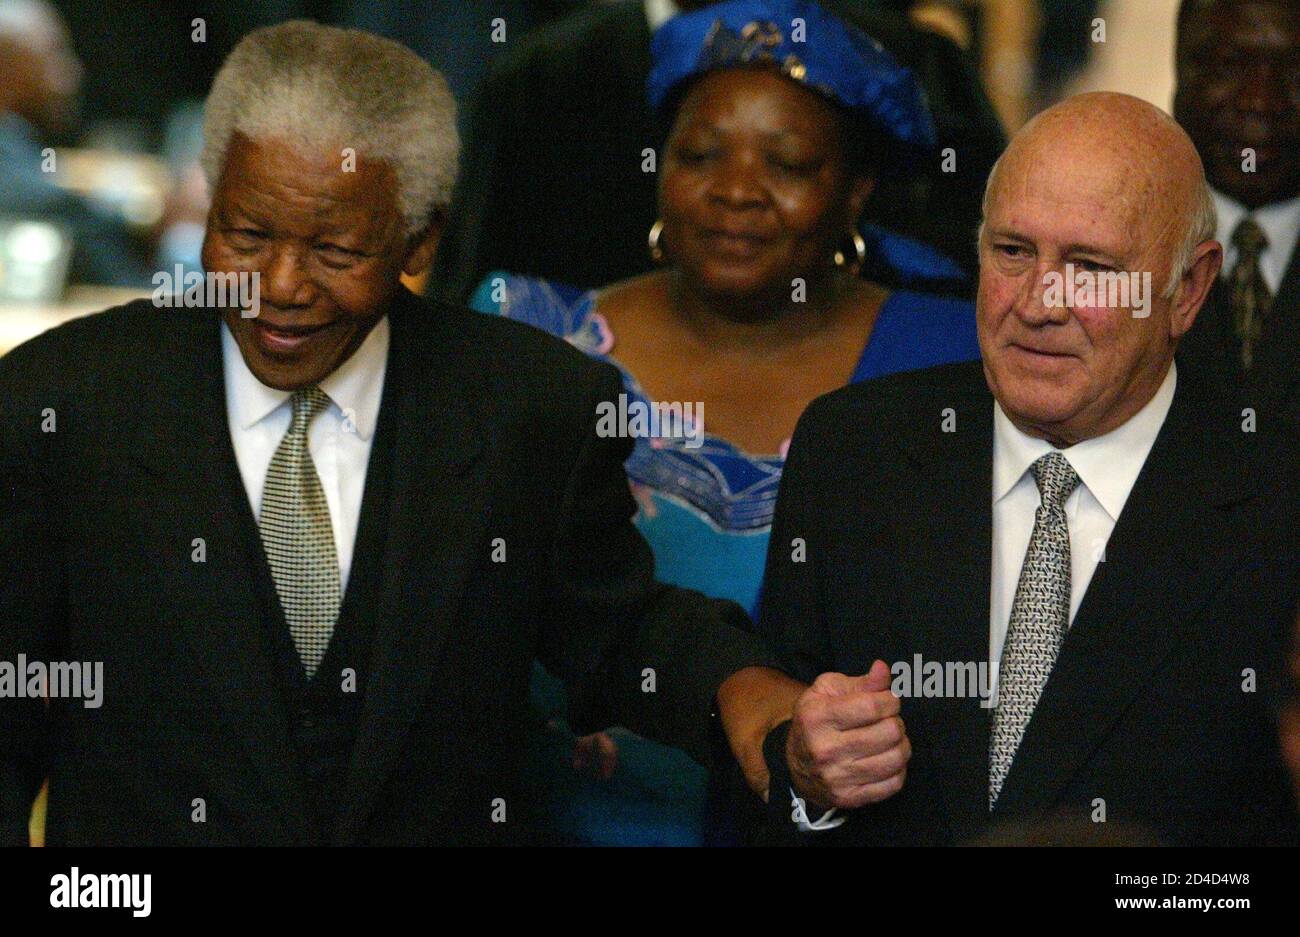 Former South African Presidents Nelson Mandela and FW de Klerk leave the  country's Parliament in Cape Town, May 10, 2004. Mandela and FW de Klerk  addressed a special joint sitting of Parliament